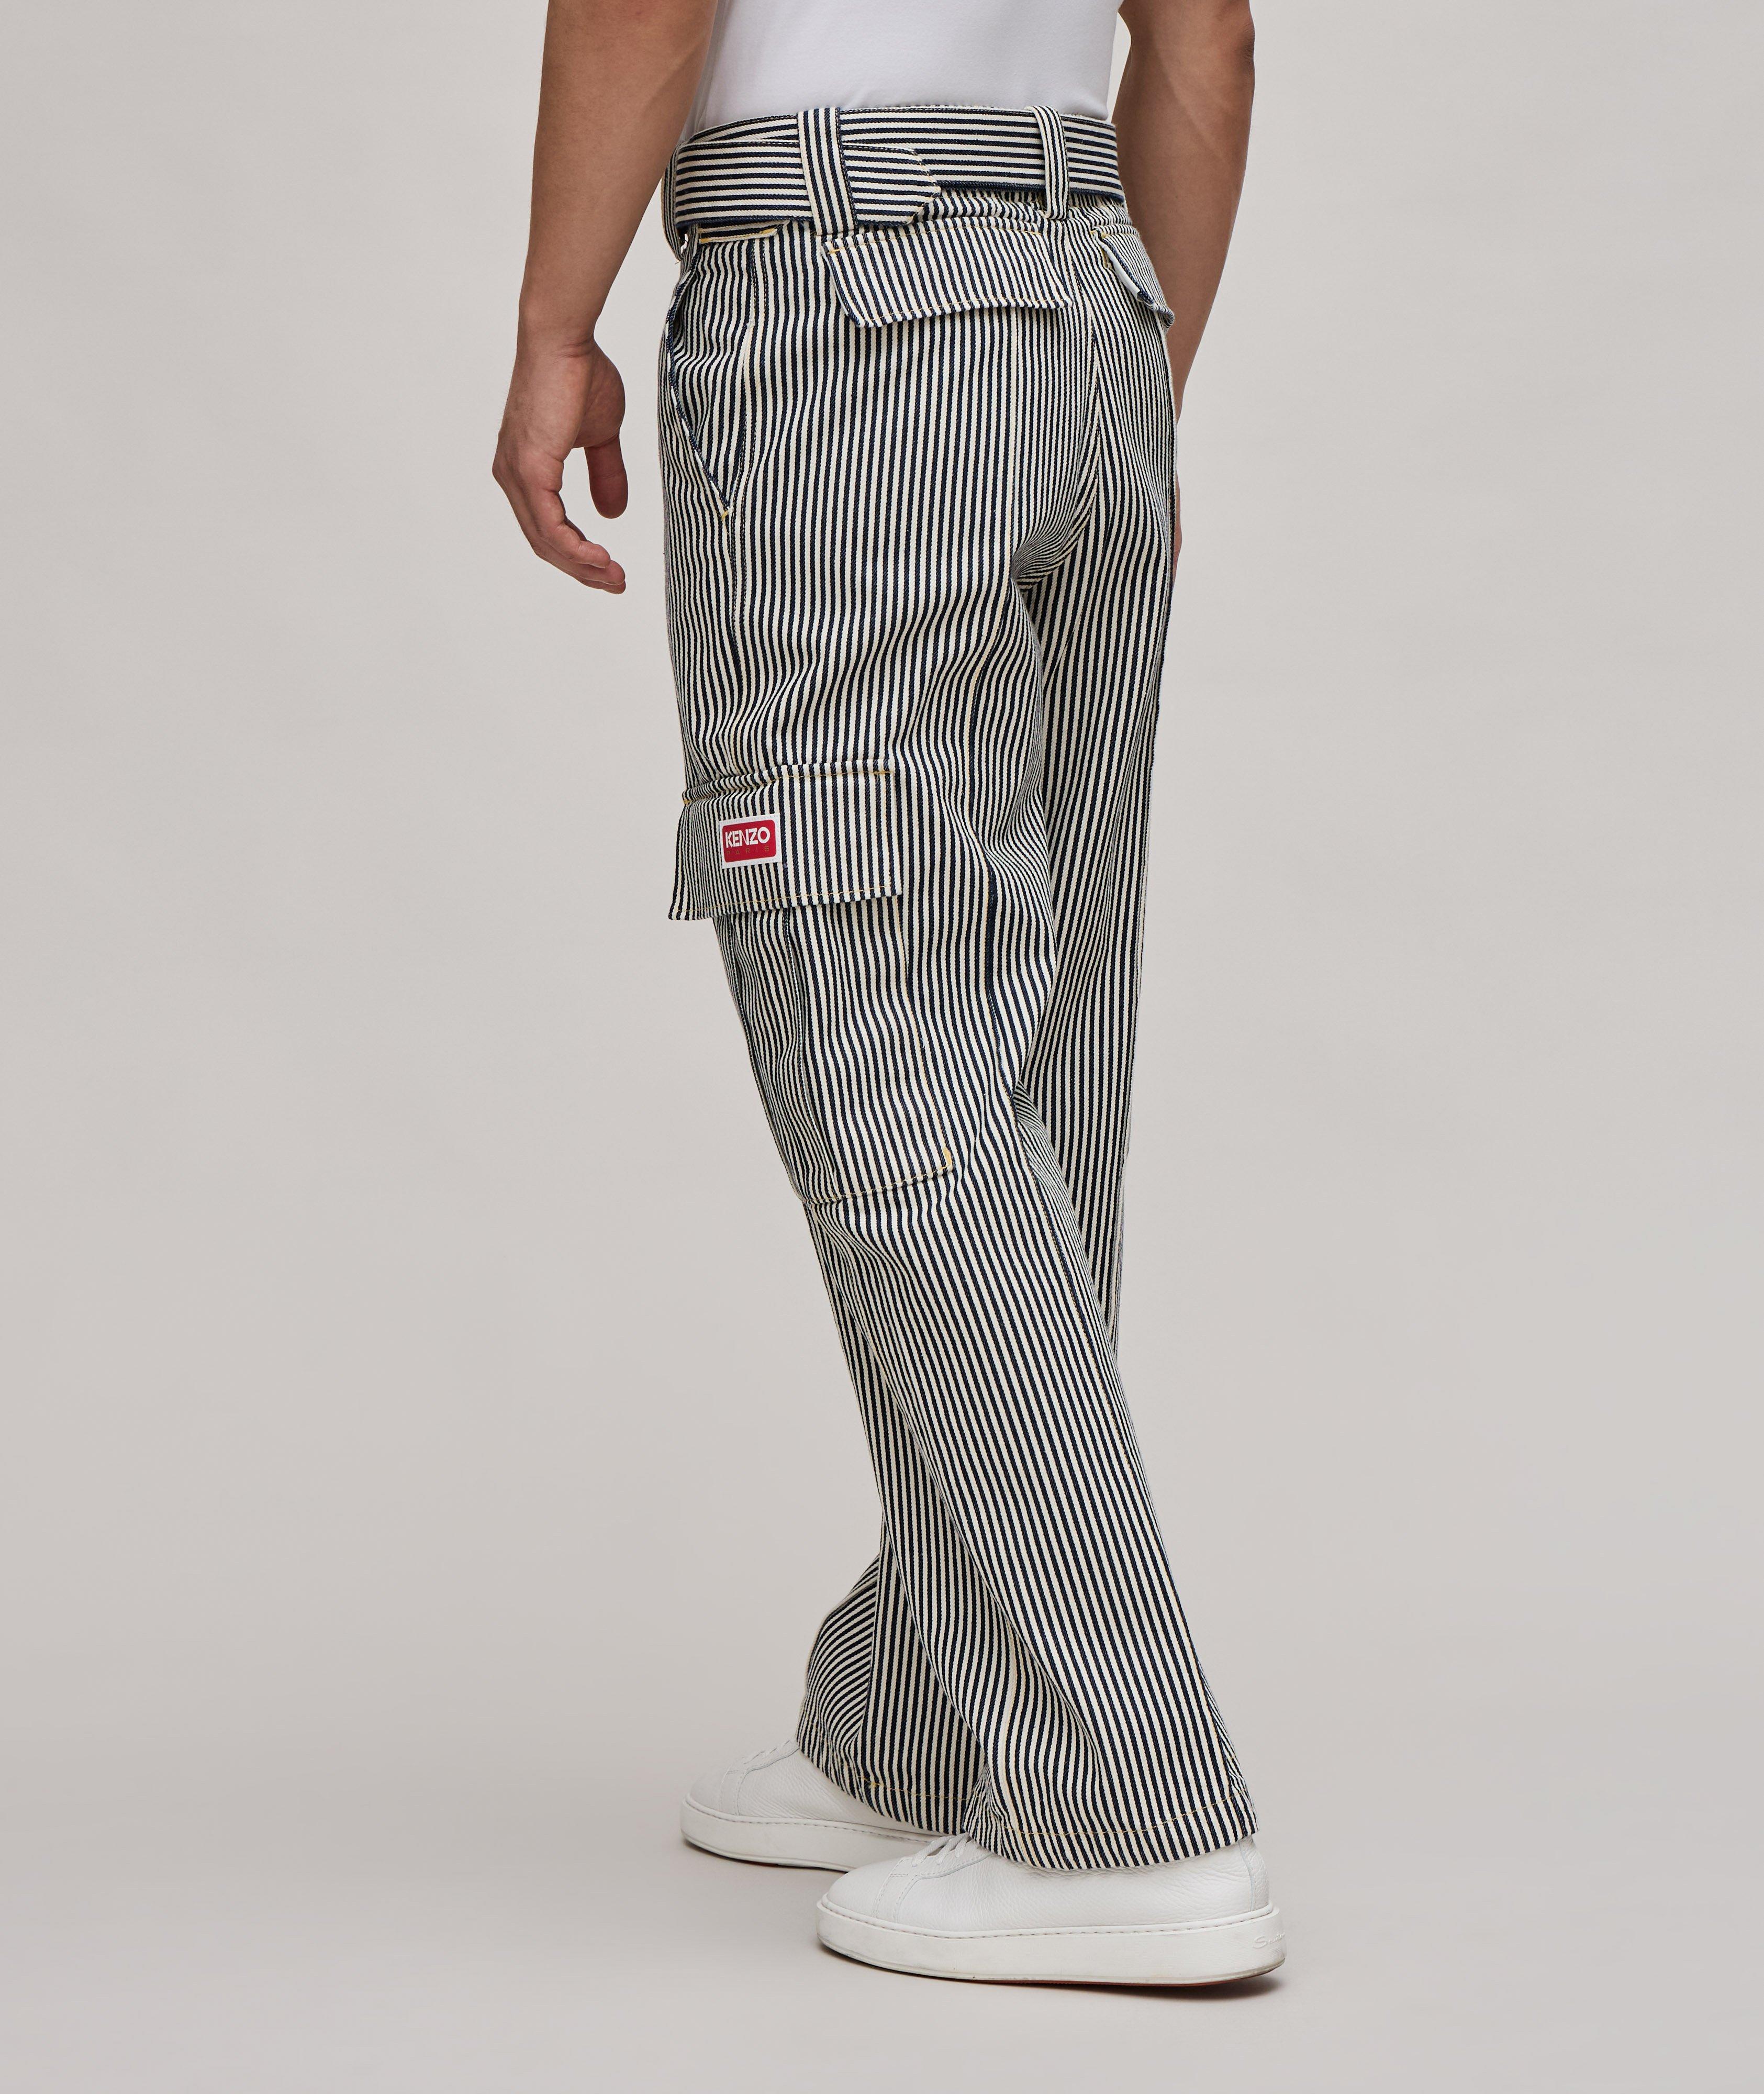 Striped Cargo Jeans image 3